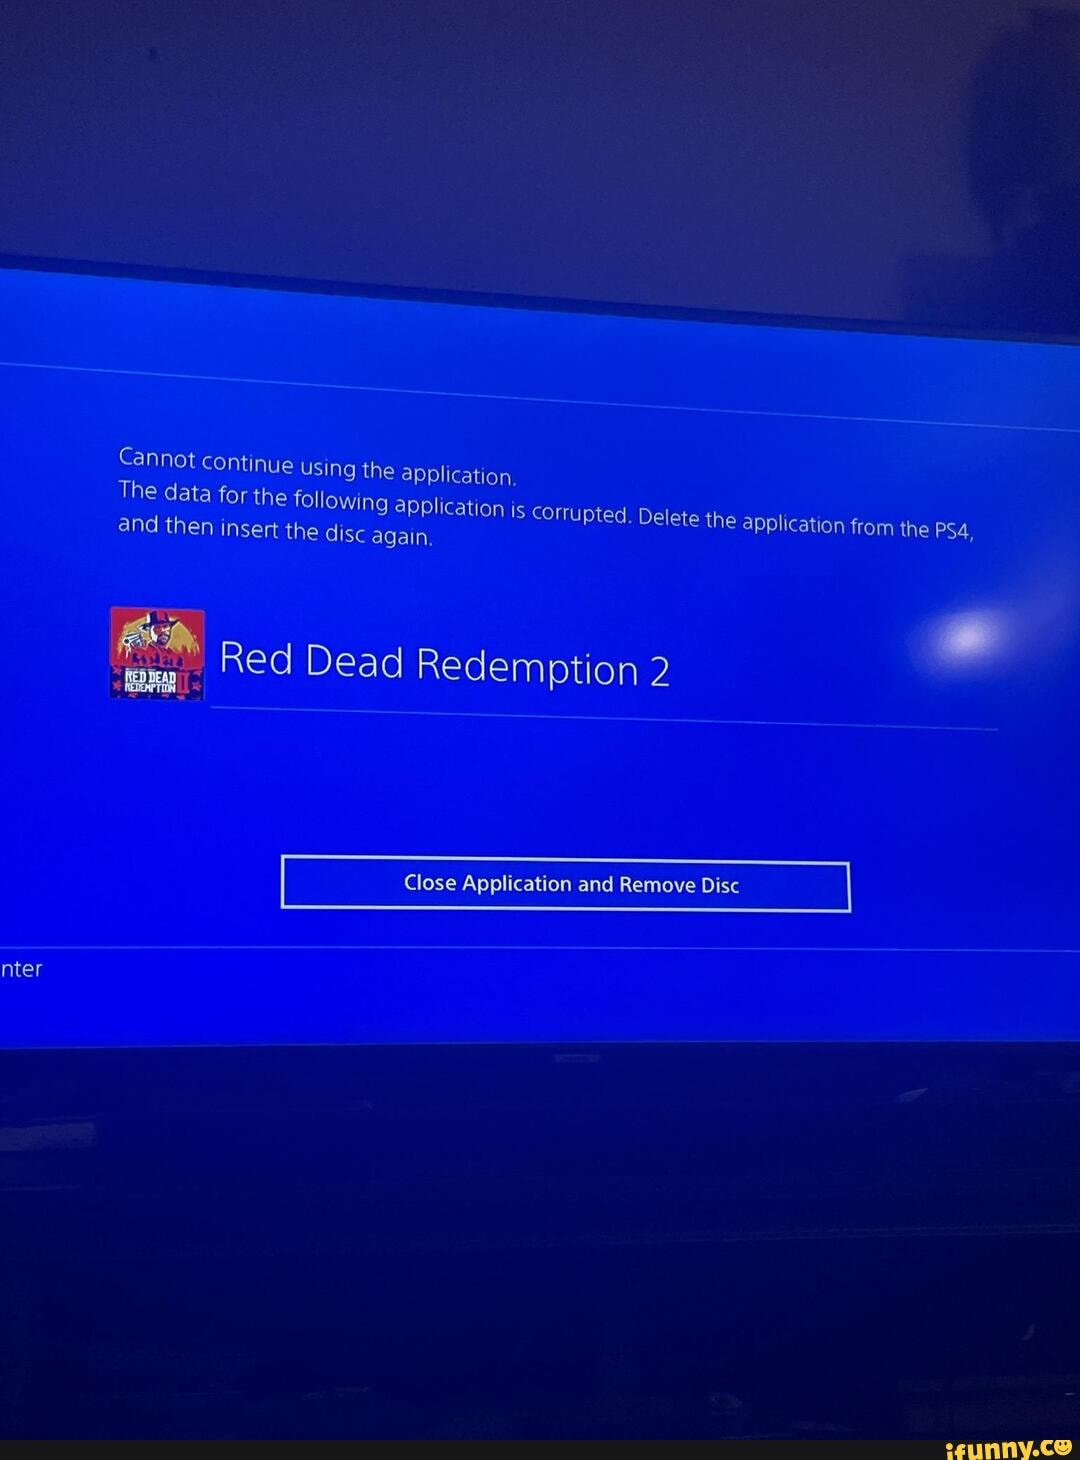 3 times my PS4 has done this - continue Using the application, The data the following application is Corrupted. the application from the and insert the disc again.